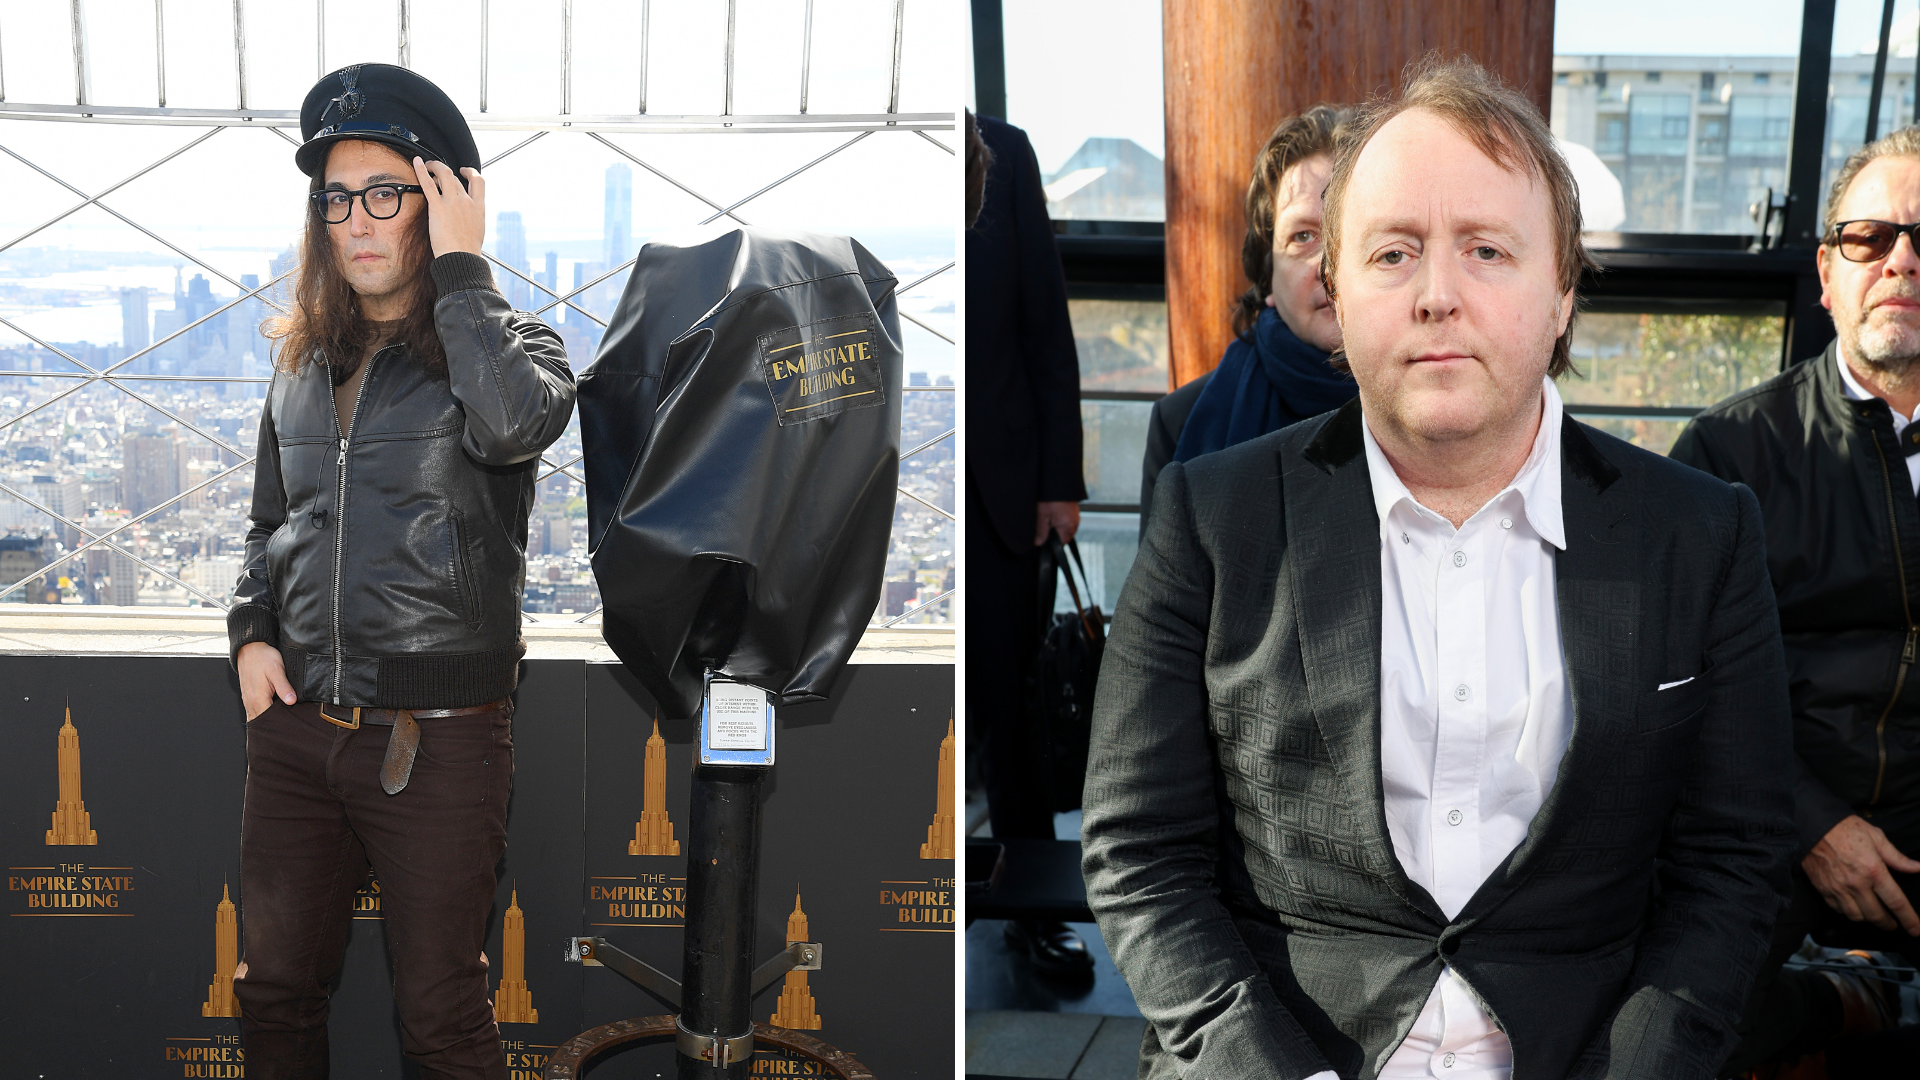 Left: Sean Ono Lennon At Empire State Building Lighting Ceremony In October 08, 2020 (Dimitrios Kam...